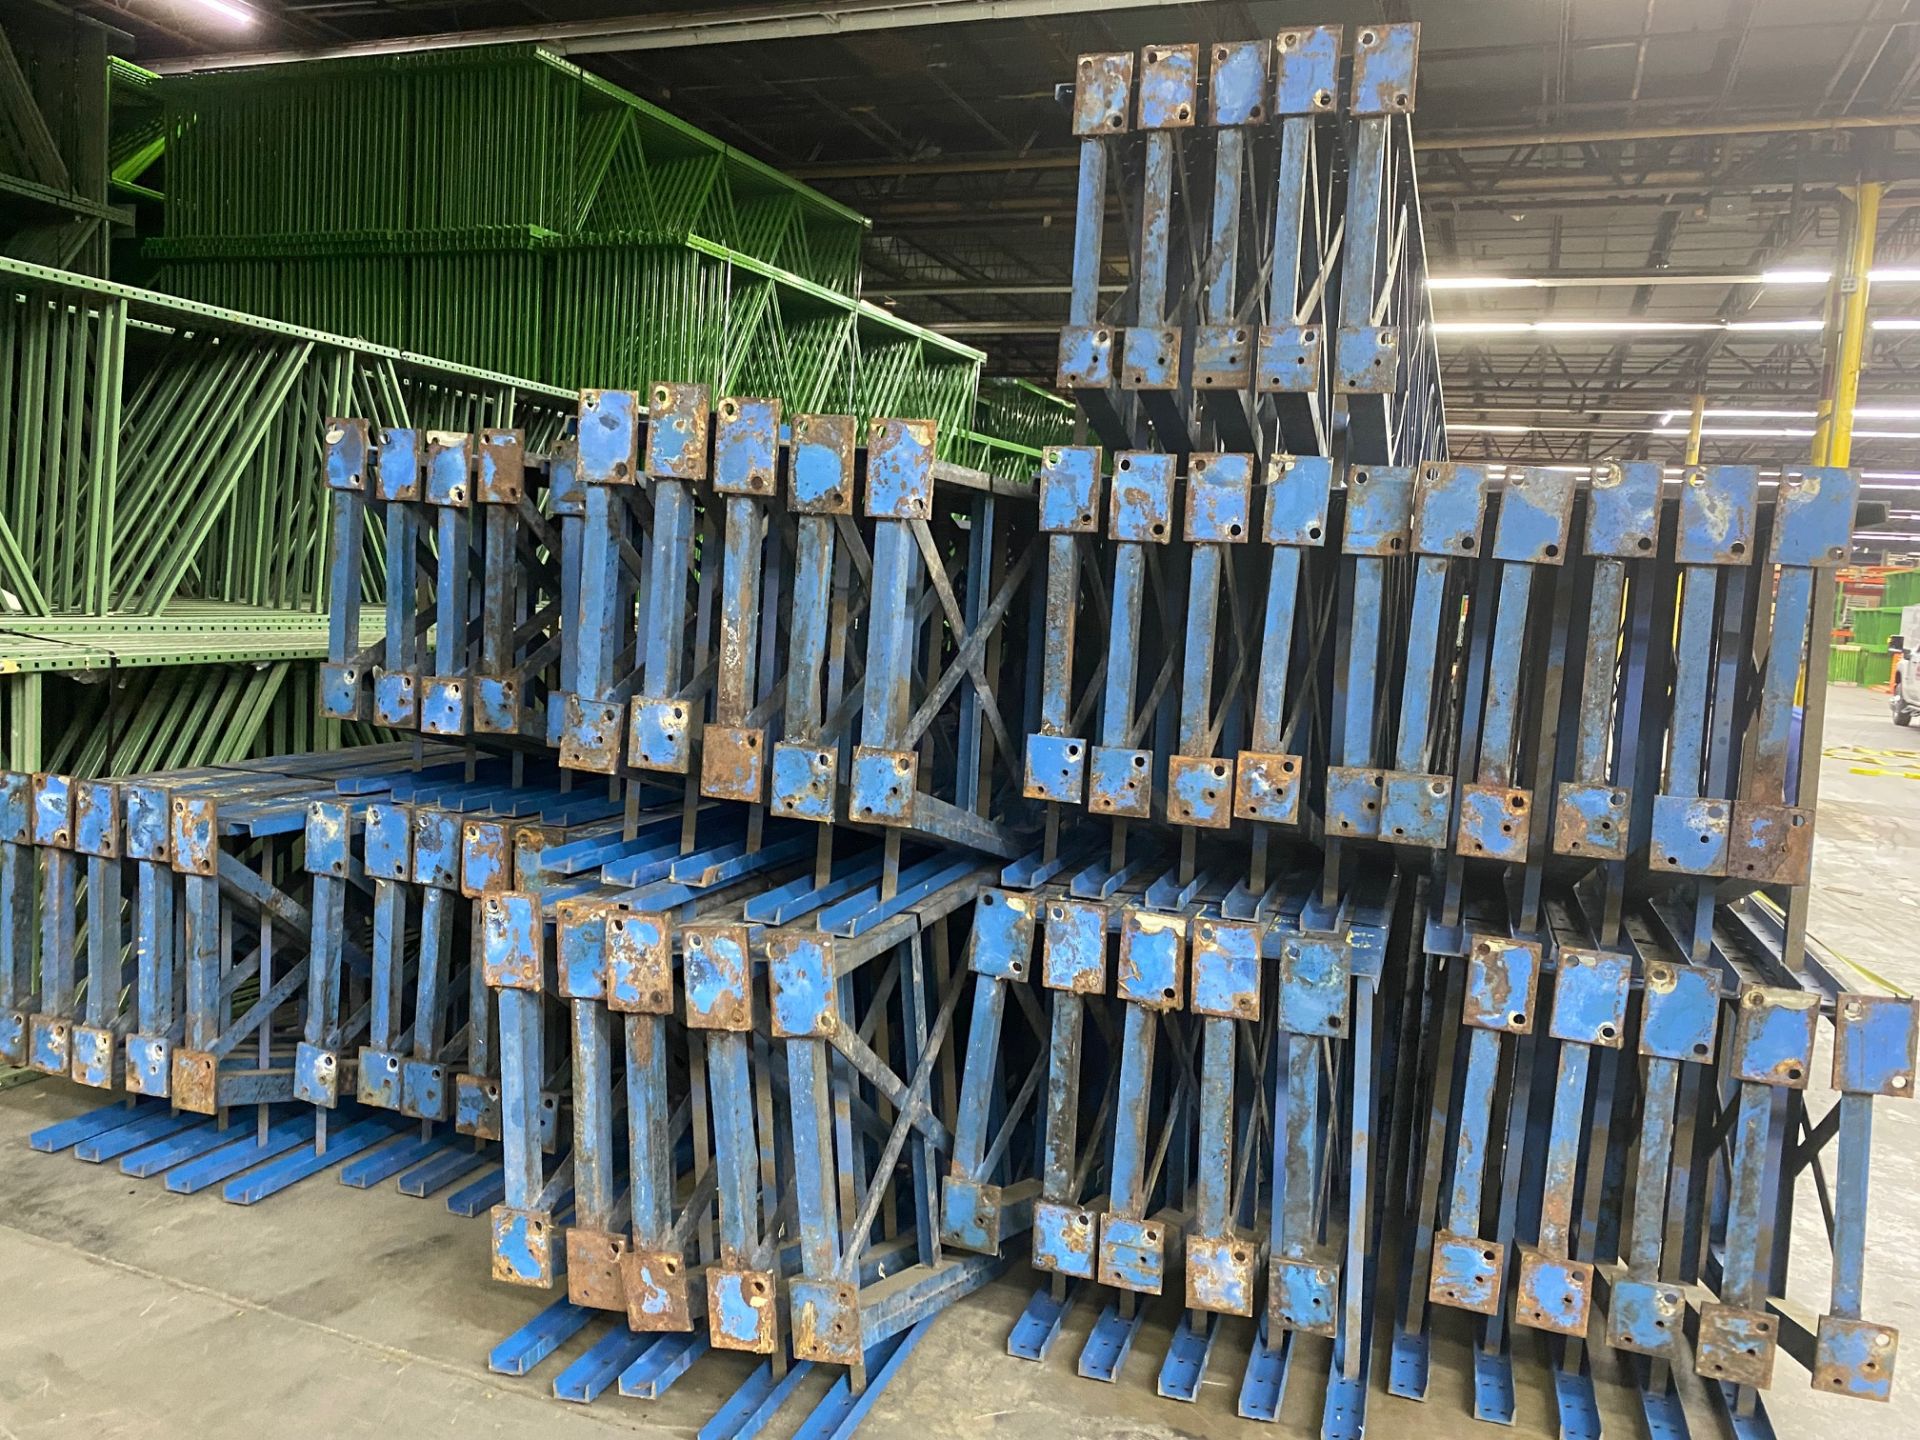 9 BAYS OF STRUCTURAL STYLE PALLET RACKS - 9 BAYS X 1 LINES X 30'H X 36"D X 112"W - Image 2 of 5